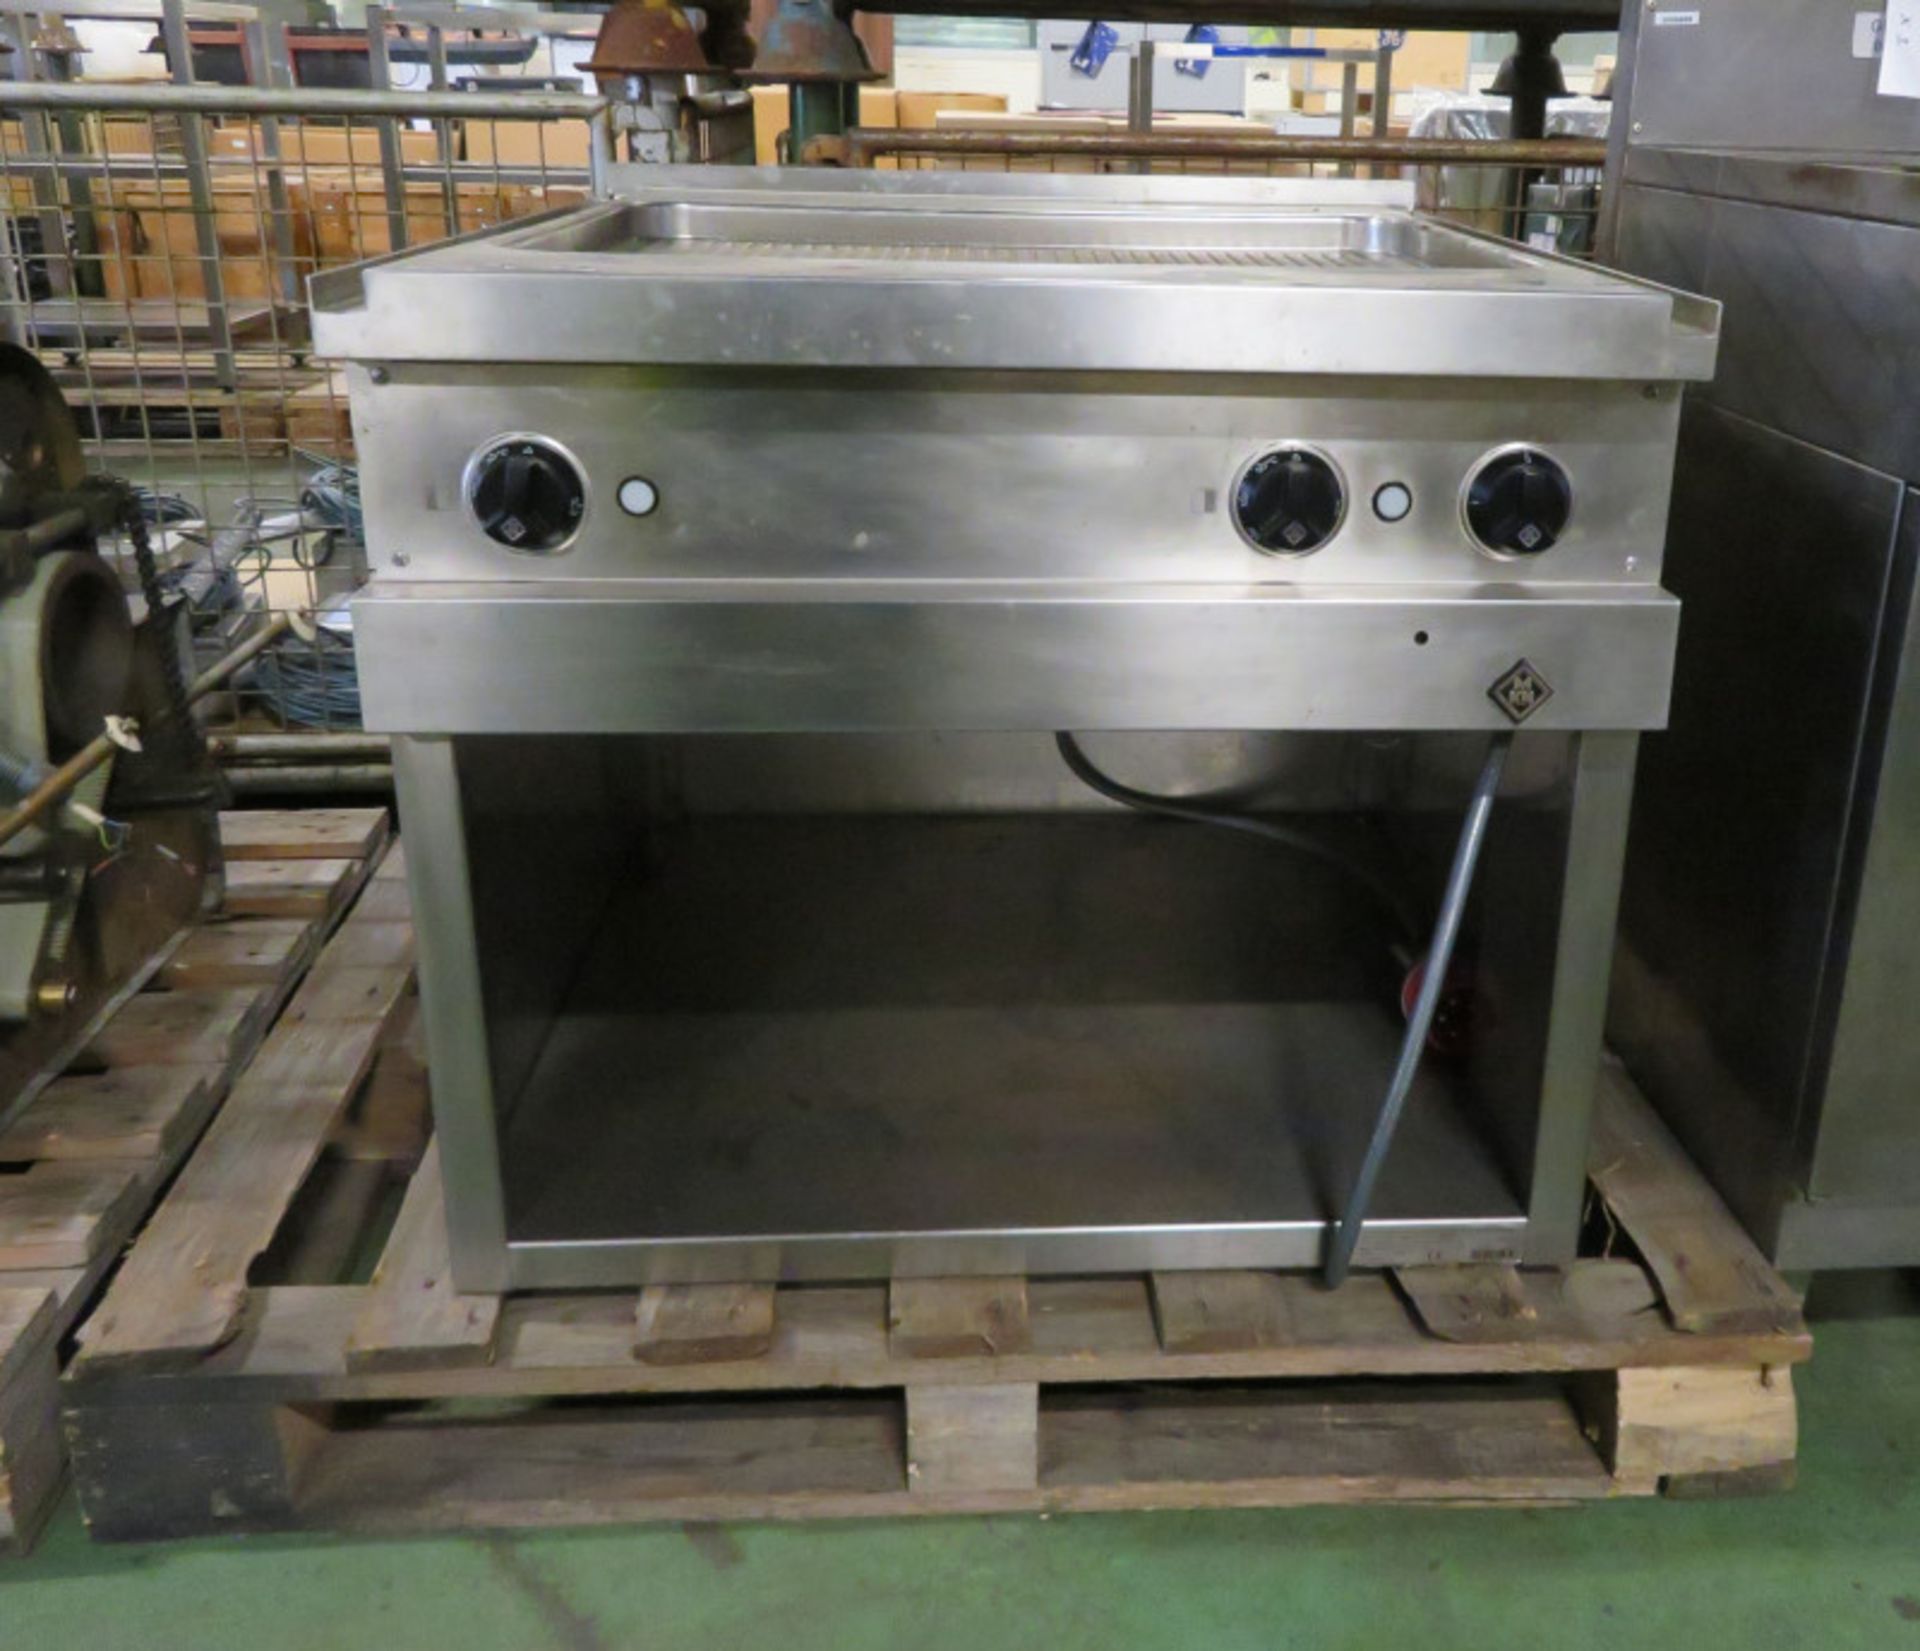 MKN Stainless steel Electric Griddle Plate L 860mm x W 800mm x H 710mm - Image 2 of 3